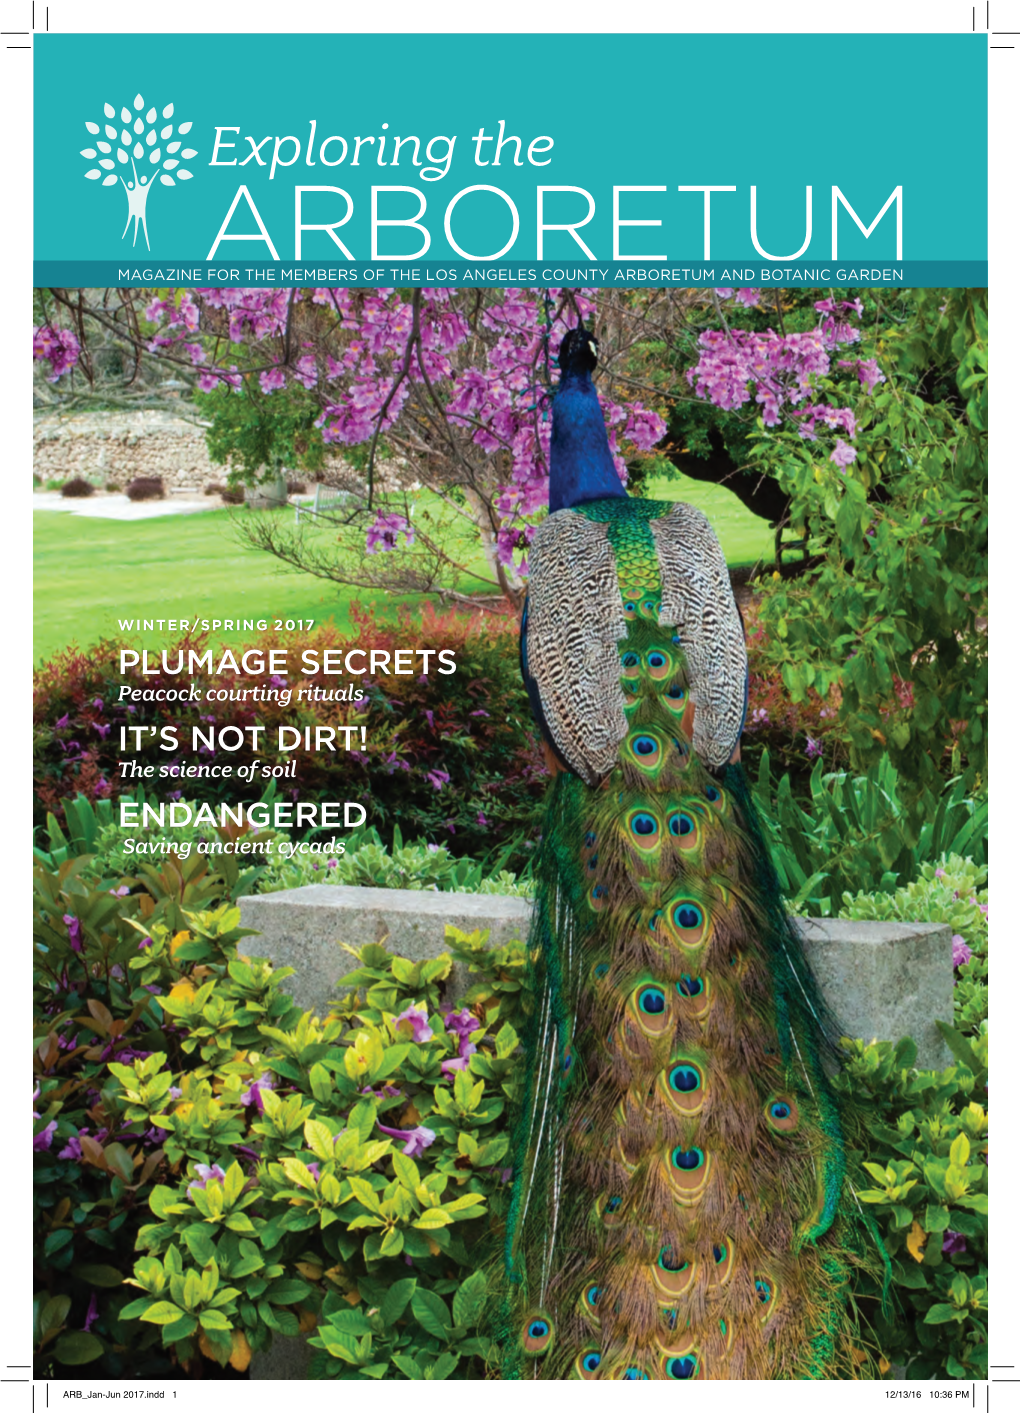 Exploring the ARBORETUM Magazine for the Members of the LOS ANGELES COUNTY ARBORETUM and BOTANIC GARDEN